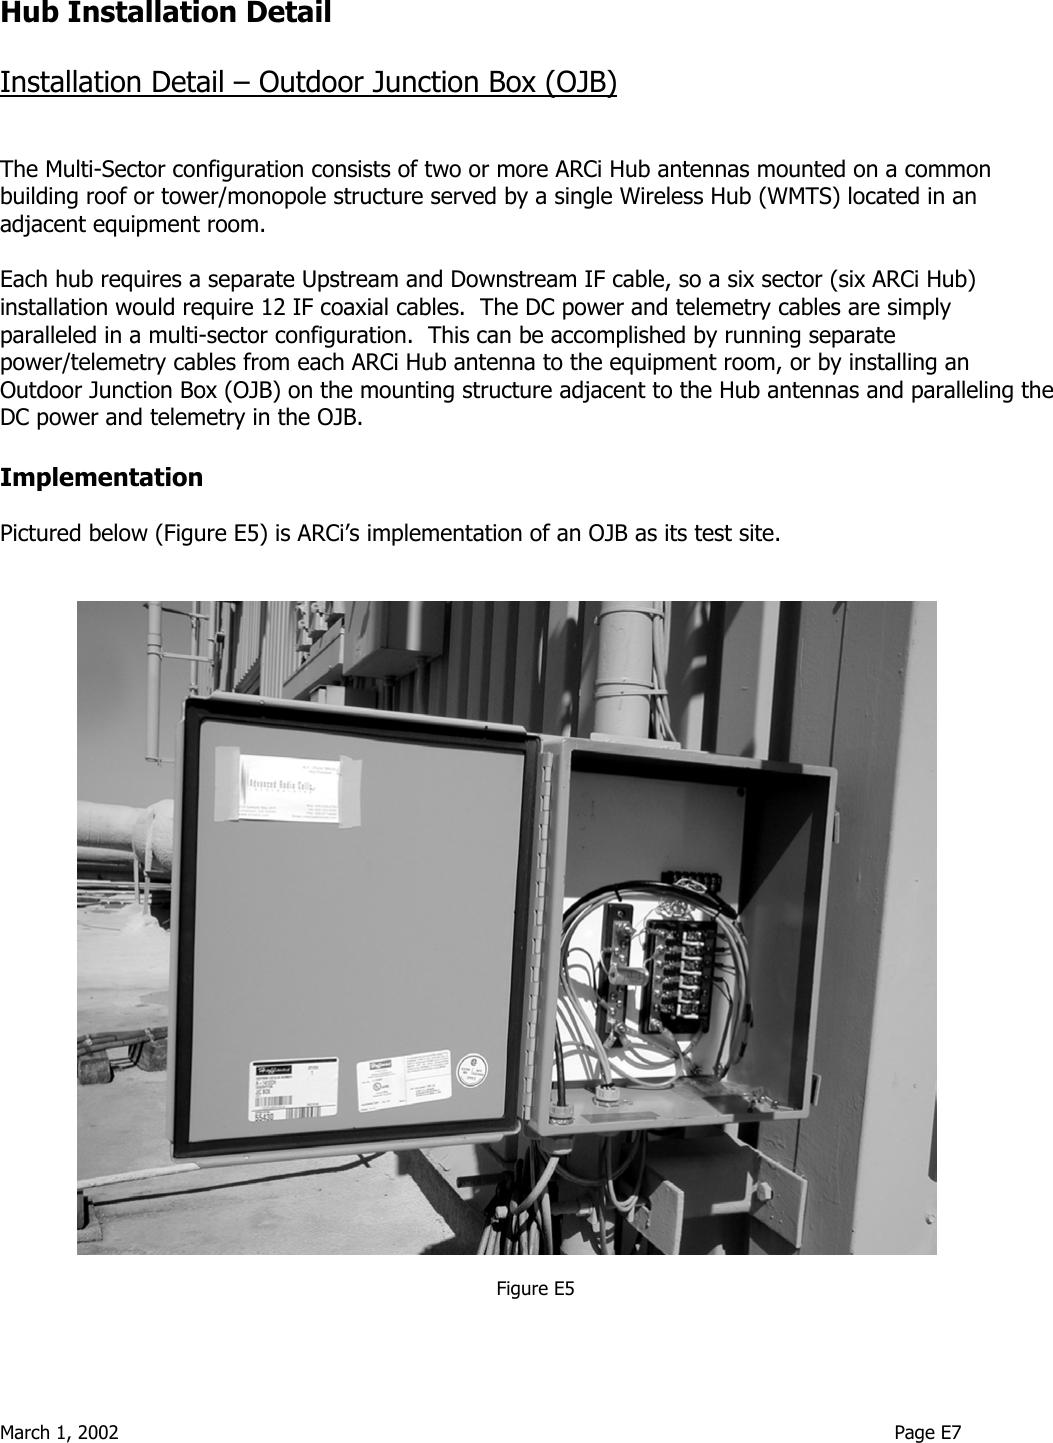  March 1, 2002                                                                                                                                    Page E7  Hub Installation Detail  Installation Detail – Outdoor Junction Box (OJB)   The Multi-Sector configuration consists of two or more ARCi Hub antennas mounted on a common building roof or tower/monopole structure served by a single Wireless Hub (WMTS) located in an adjacent equipment room.    Each hub requires a separate Upstream and Downstream IF cable, so a six sector (six ARCi Hub) installation would require 12 IF coaxial cables.  The DC power and telemetry cables are simply paralleled in a multi-sector configuration.  This can be accomplished by running separate power/telemetry cables from each ARCi Hub antenna to the equipment room, or by installing an Outdoor Junction Box (OJB) on the mounting structure adjacent to the Hub antennas and paralleling the DC power and telemetry in the OJB.  Implementation  Pictured below (Figure E5) is ARCi’s implementation of an OJB as its test site.     Figure E5  